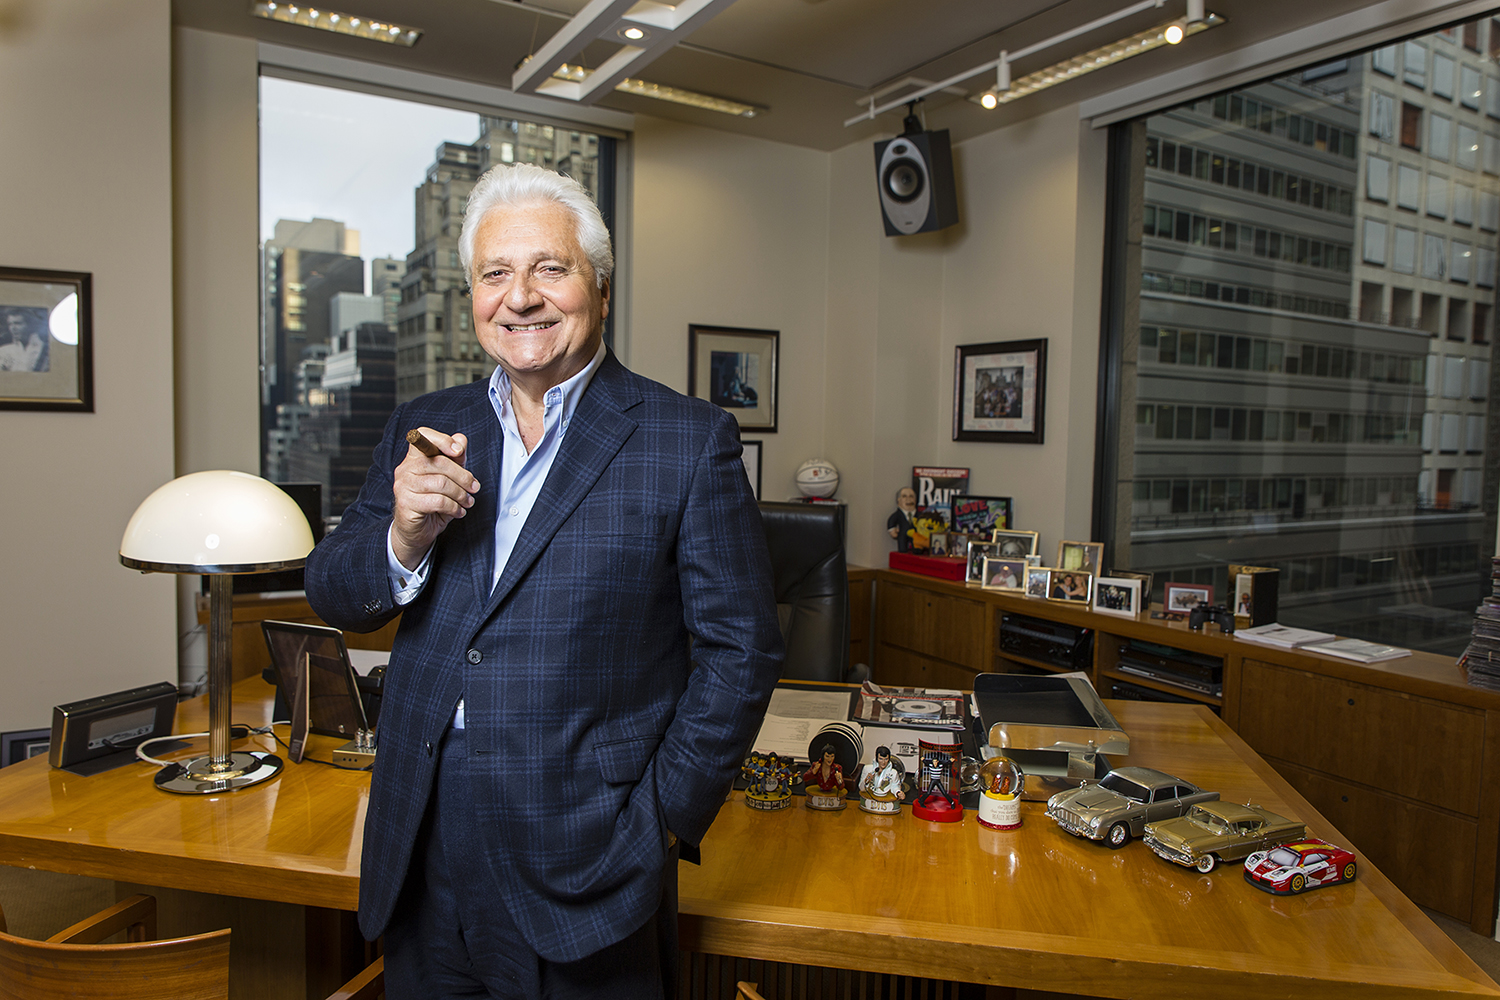 Report: Former Sony/ATV boss Martin Bandier pocketed $100m from EMI sale